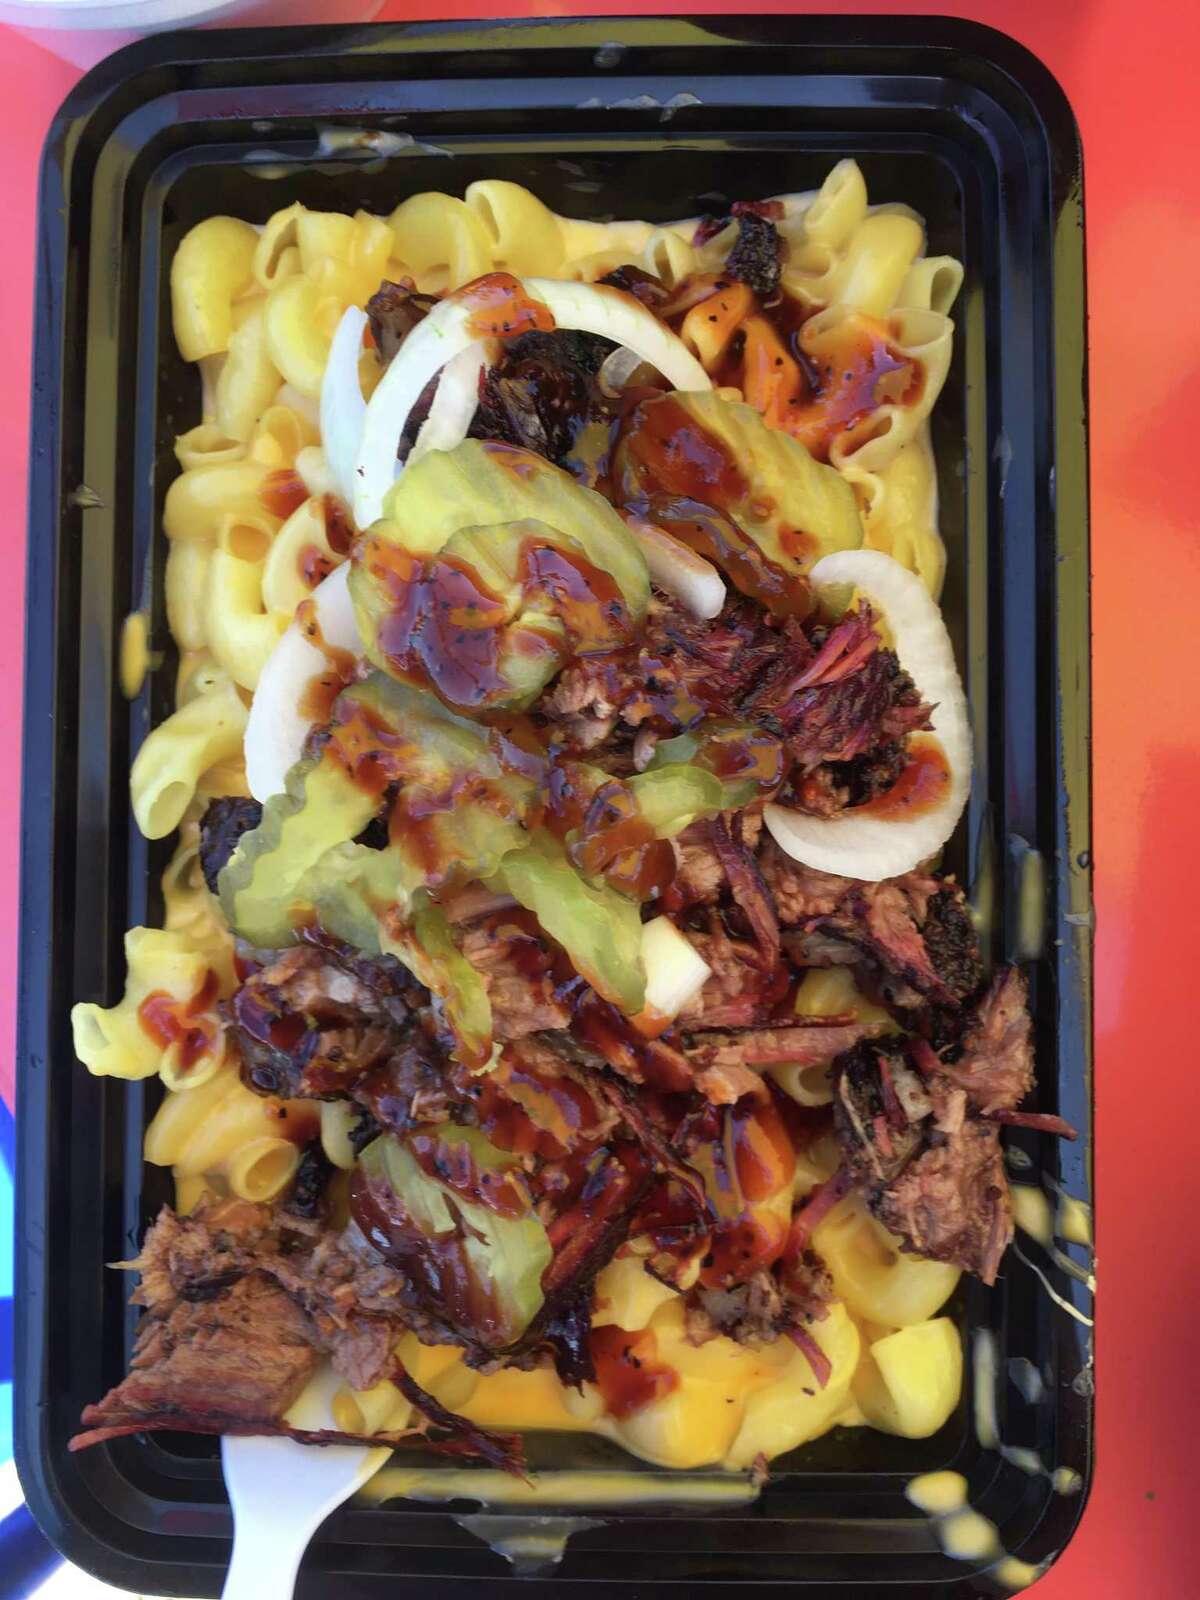 The Mac Attack ($12) at Nano's BBQ is a massive combination of creamy Velveeta-like mac and cheese topped with pickles, onions, barbecue sauce and a heavy-handed mixture of chopped brisket and pulled pork that begs to be shared.